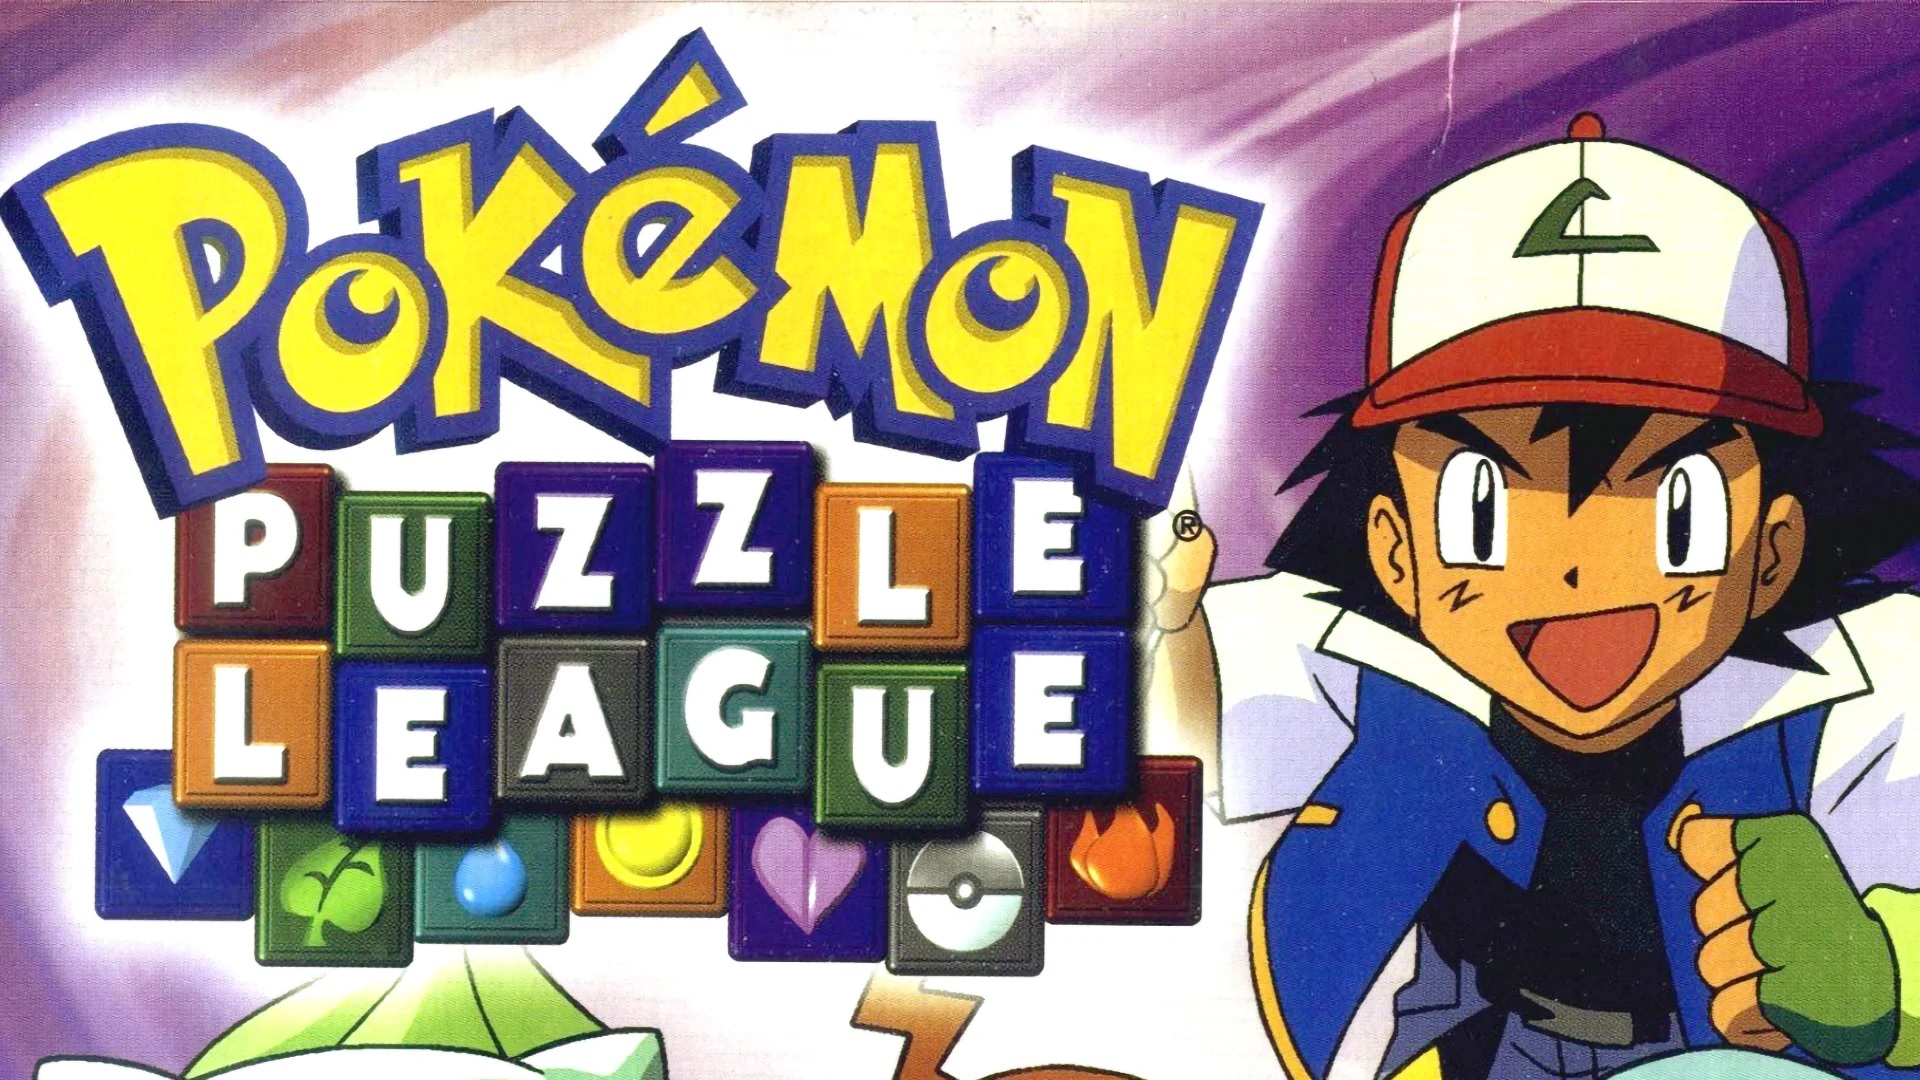 I guess I'm going to subscribe to Pokemon Puzzle League Online